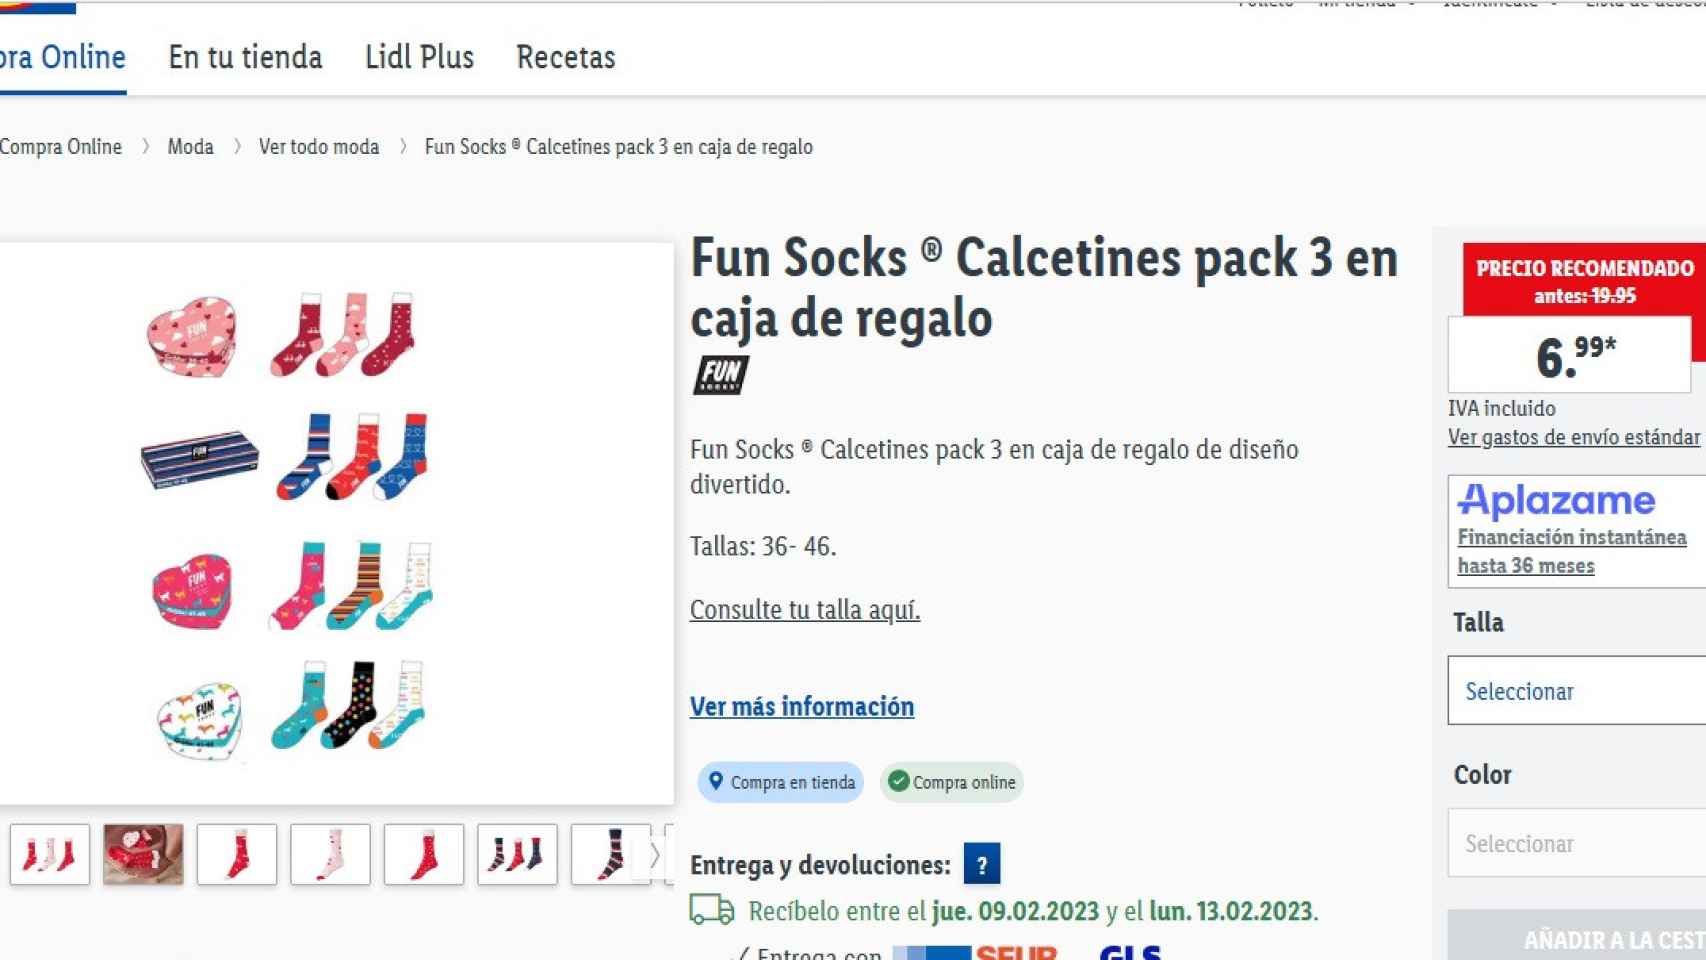 Calcetines pack 3.